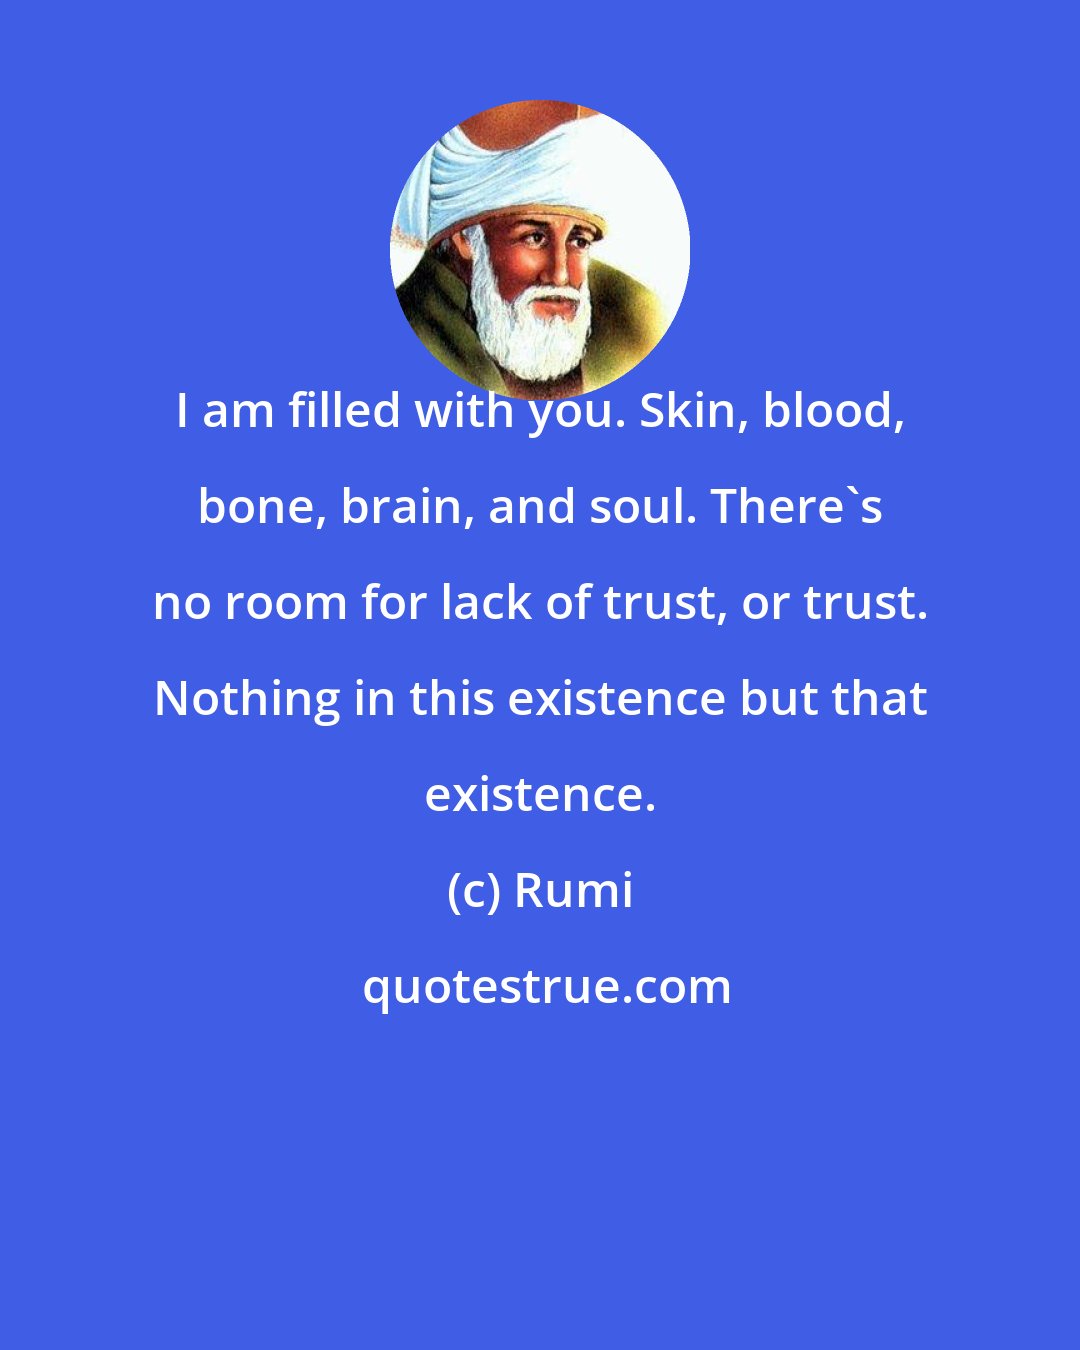 Rumi: I am filled with you. Skin, blood, bone, brain, and soul. There's no room for lack of trust, or trust. Nothing in this existence but that existence.